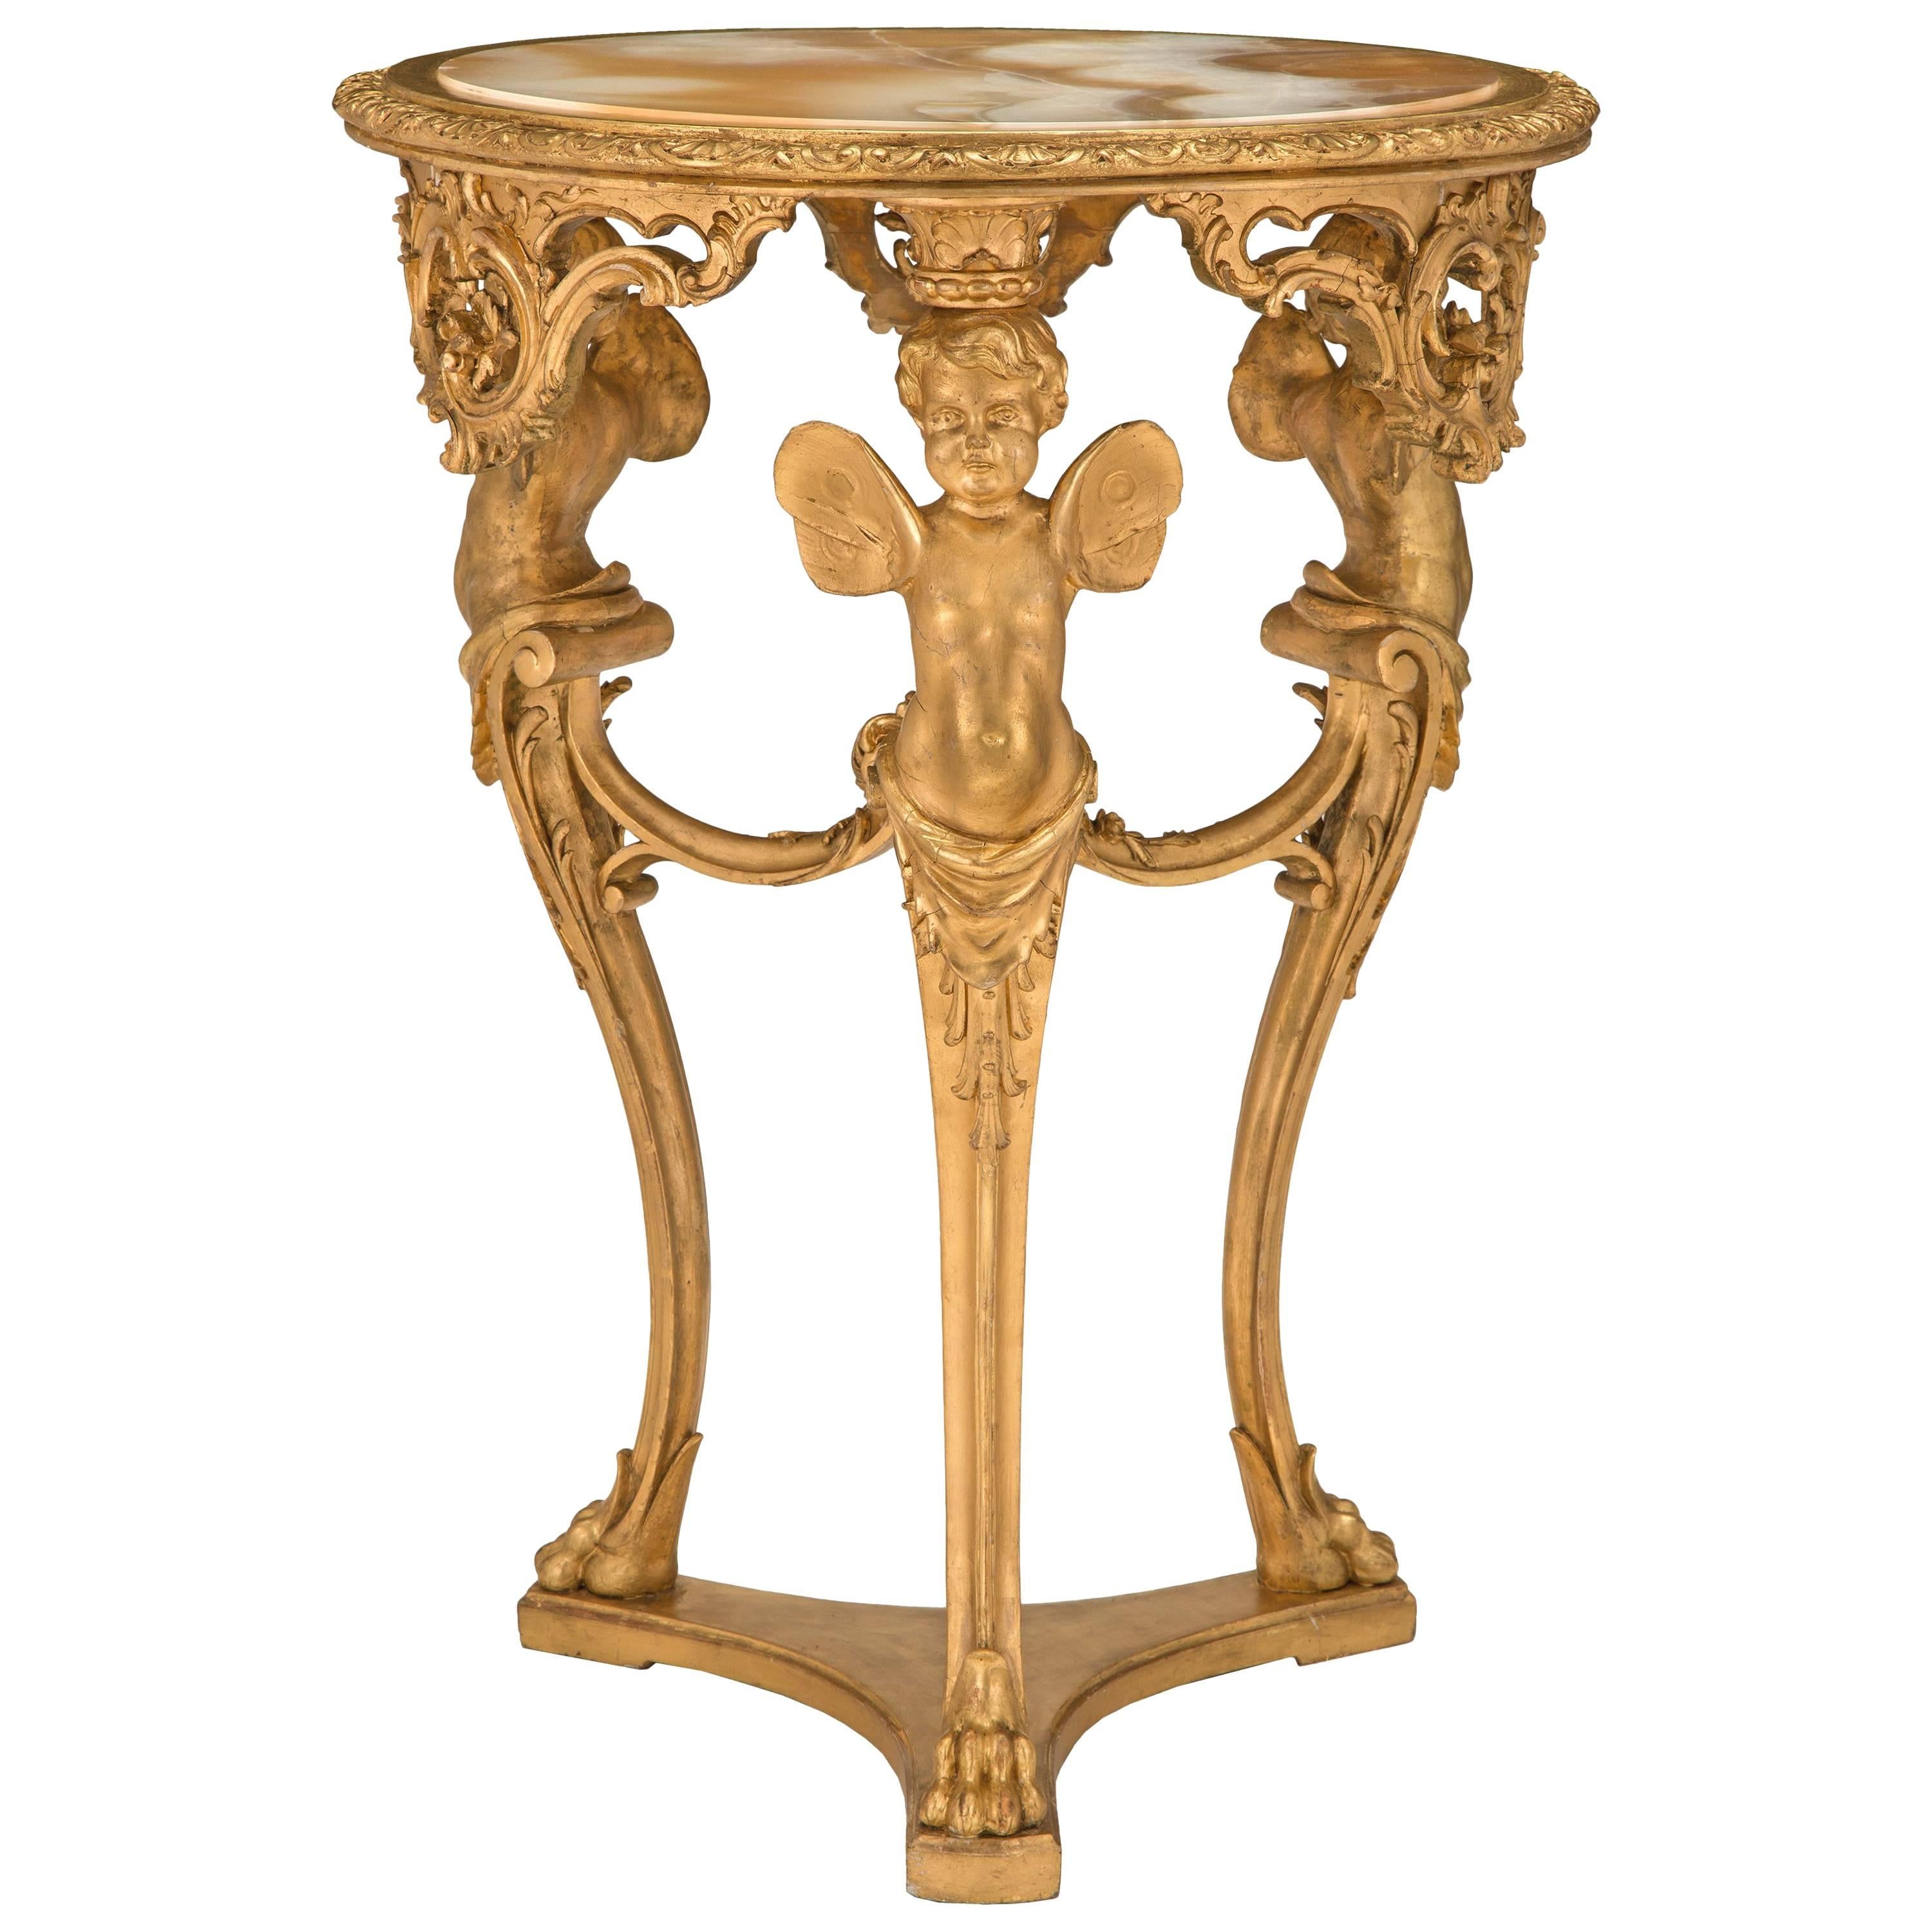 Italian Early 19th Century Louis XV Style Giltwood and Onyx Side Table